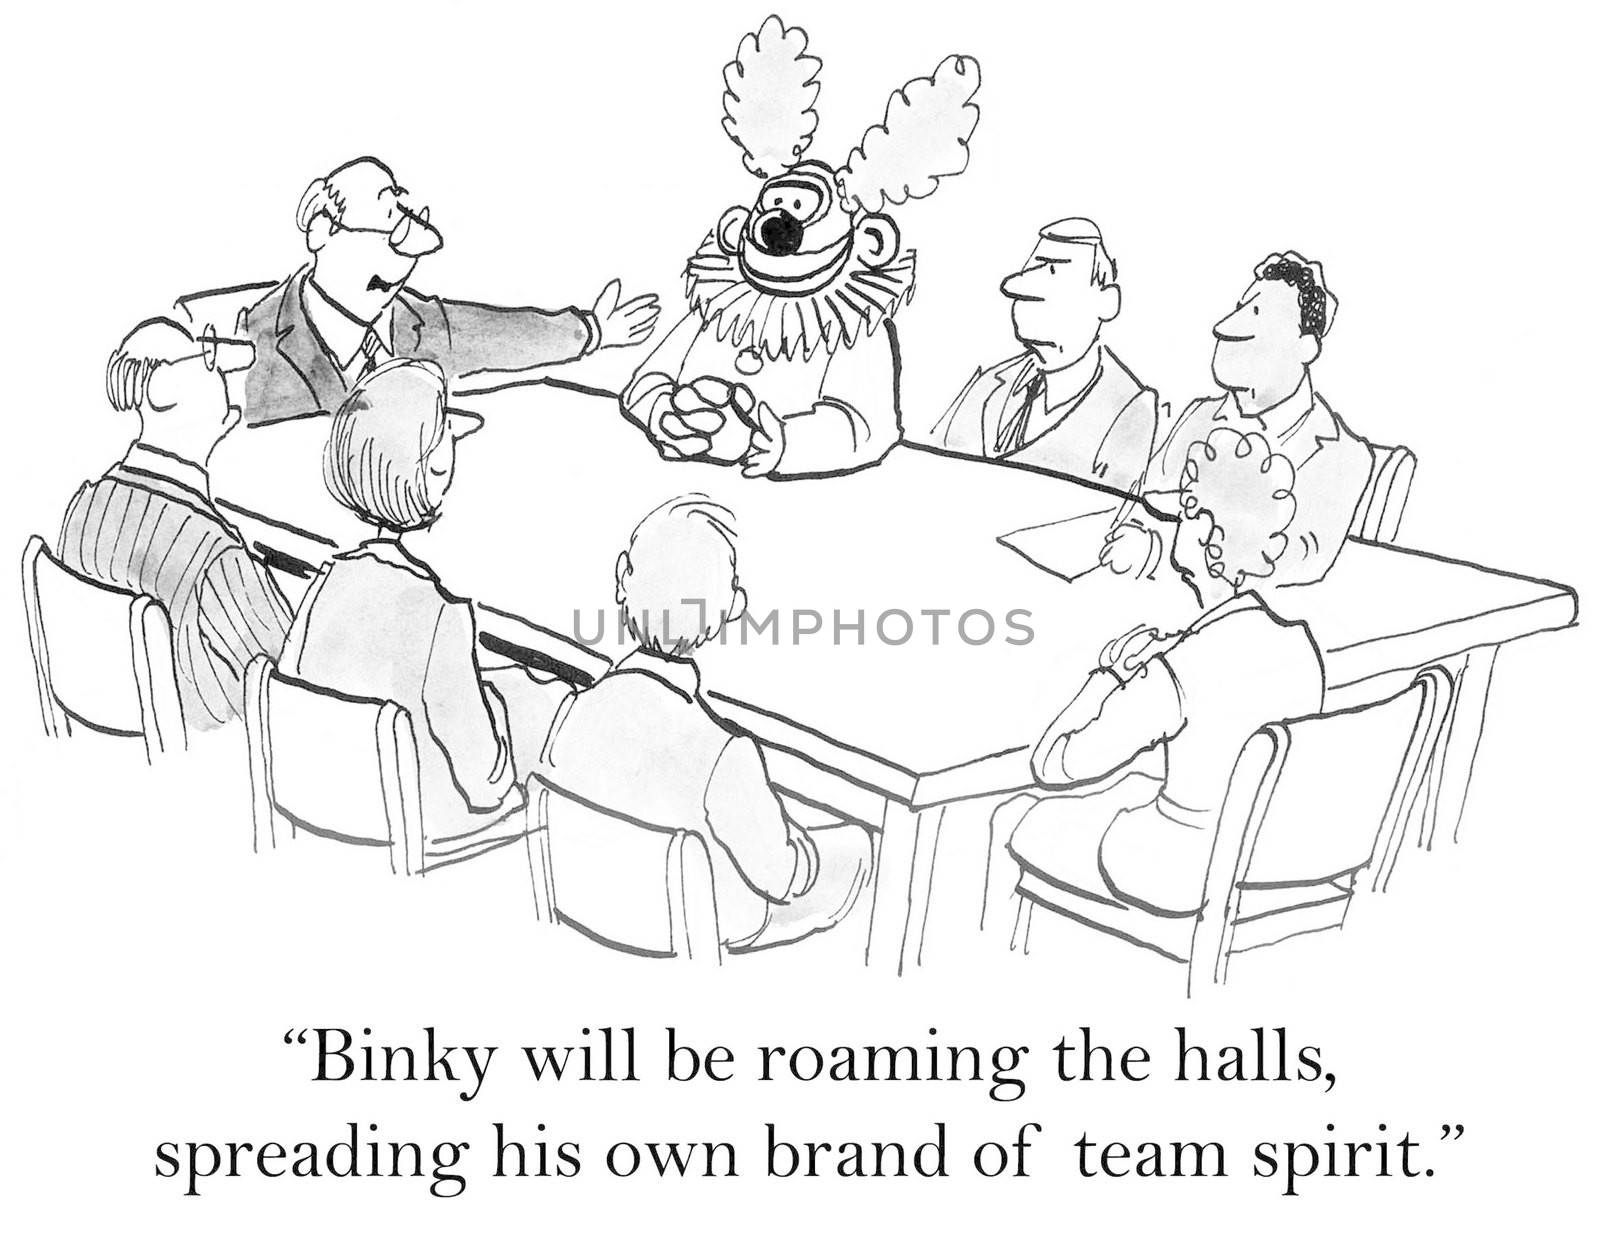 "Binky will be roaming the halls, spreading his own brand of team spirit."